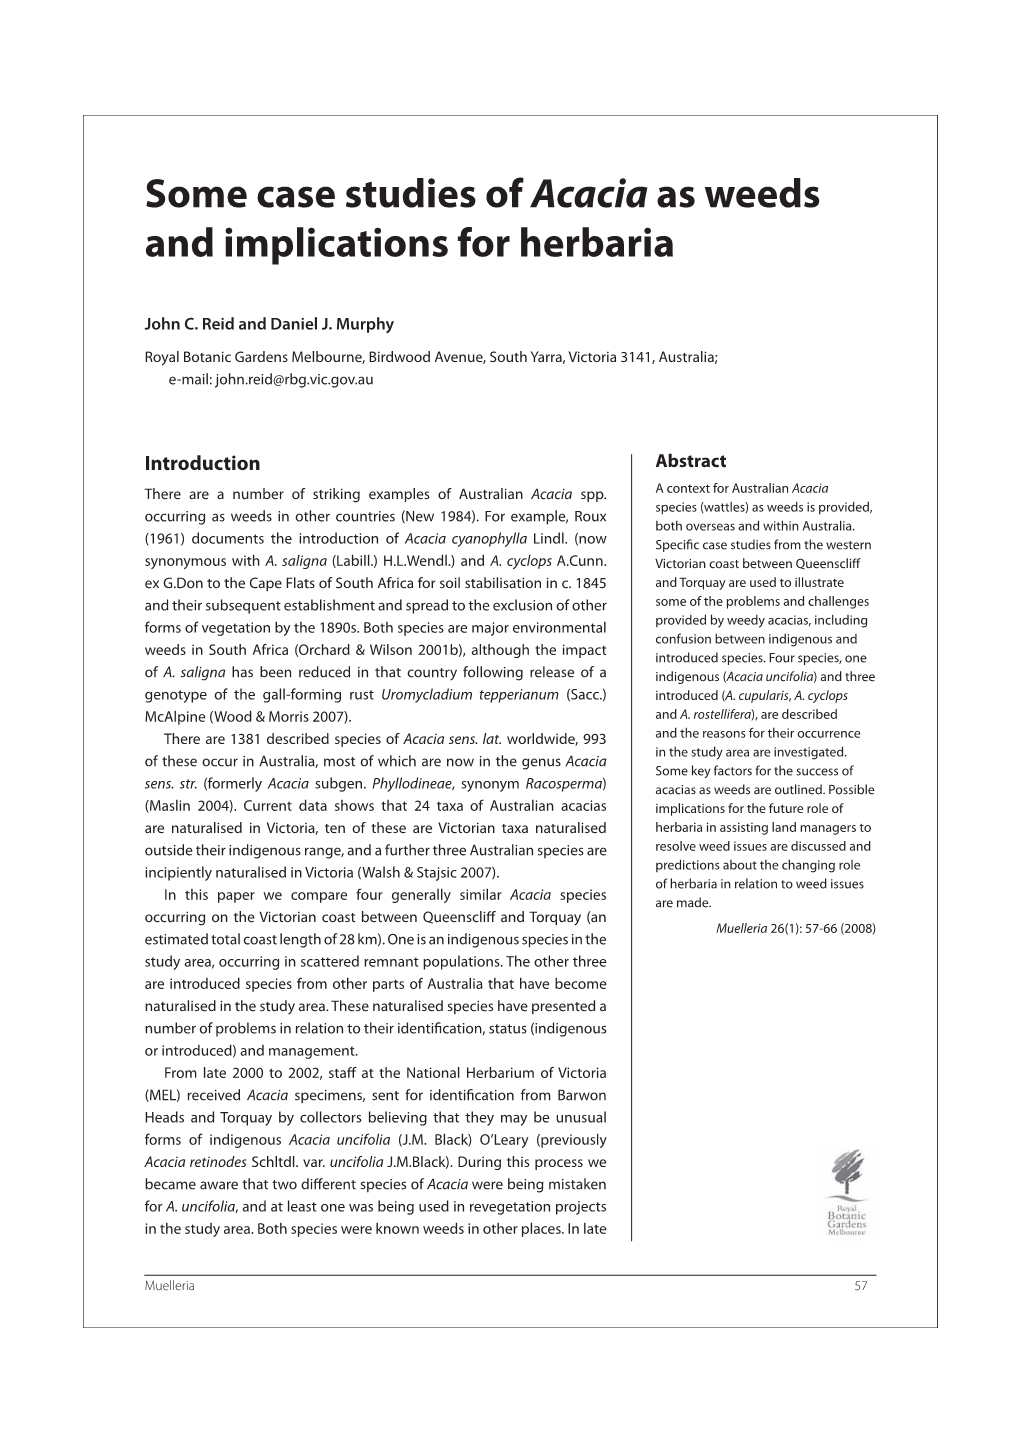 Some Case Studies of Acacia As Weeds and Implications for Herbaria